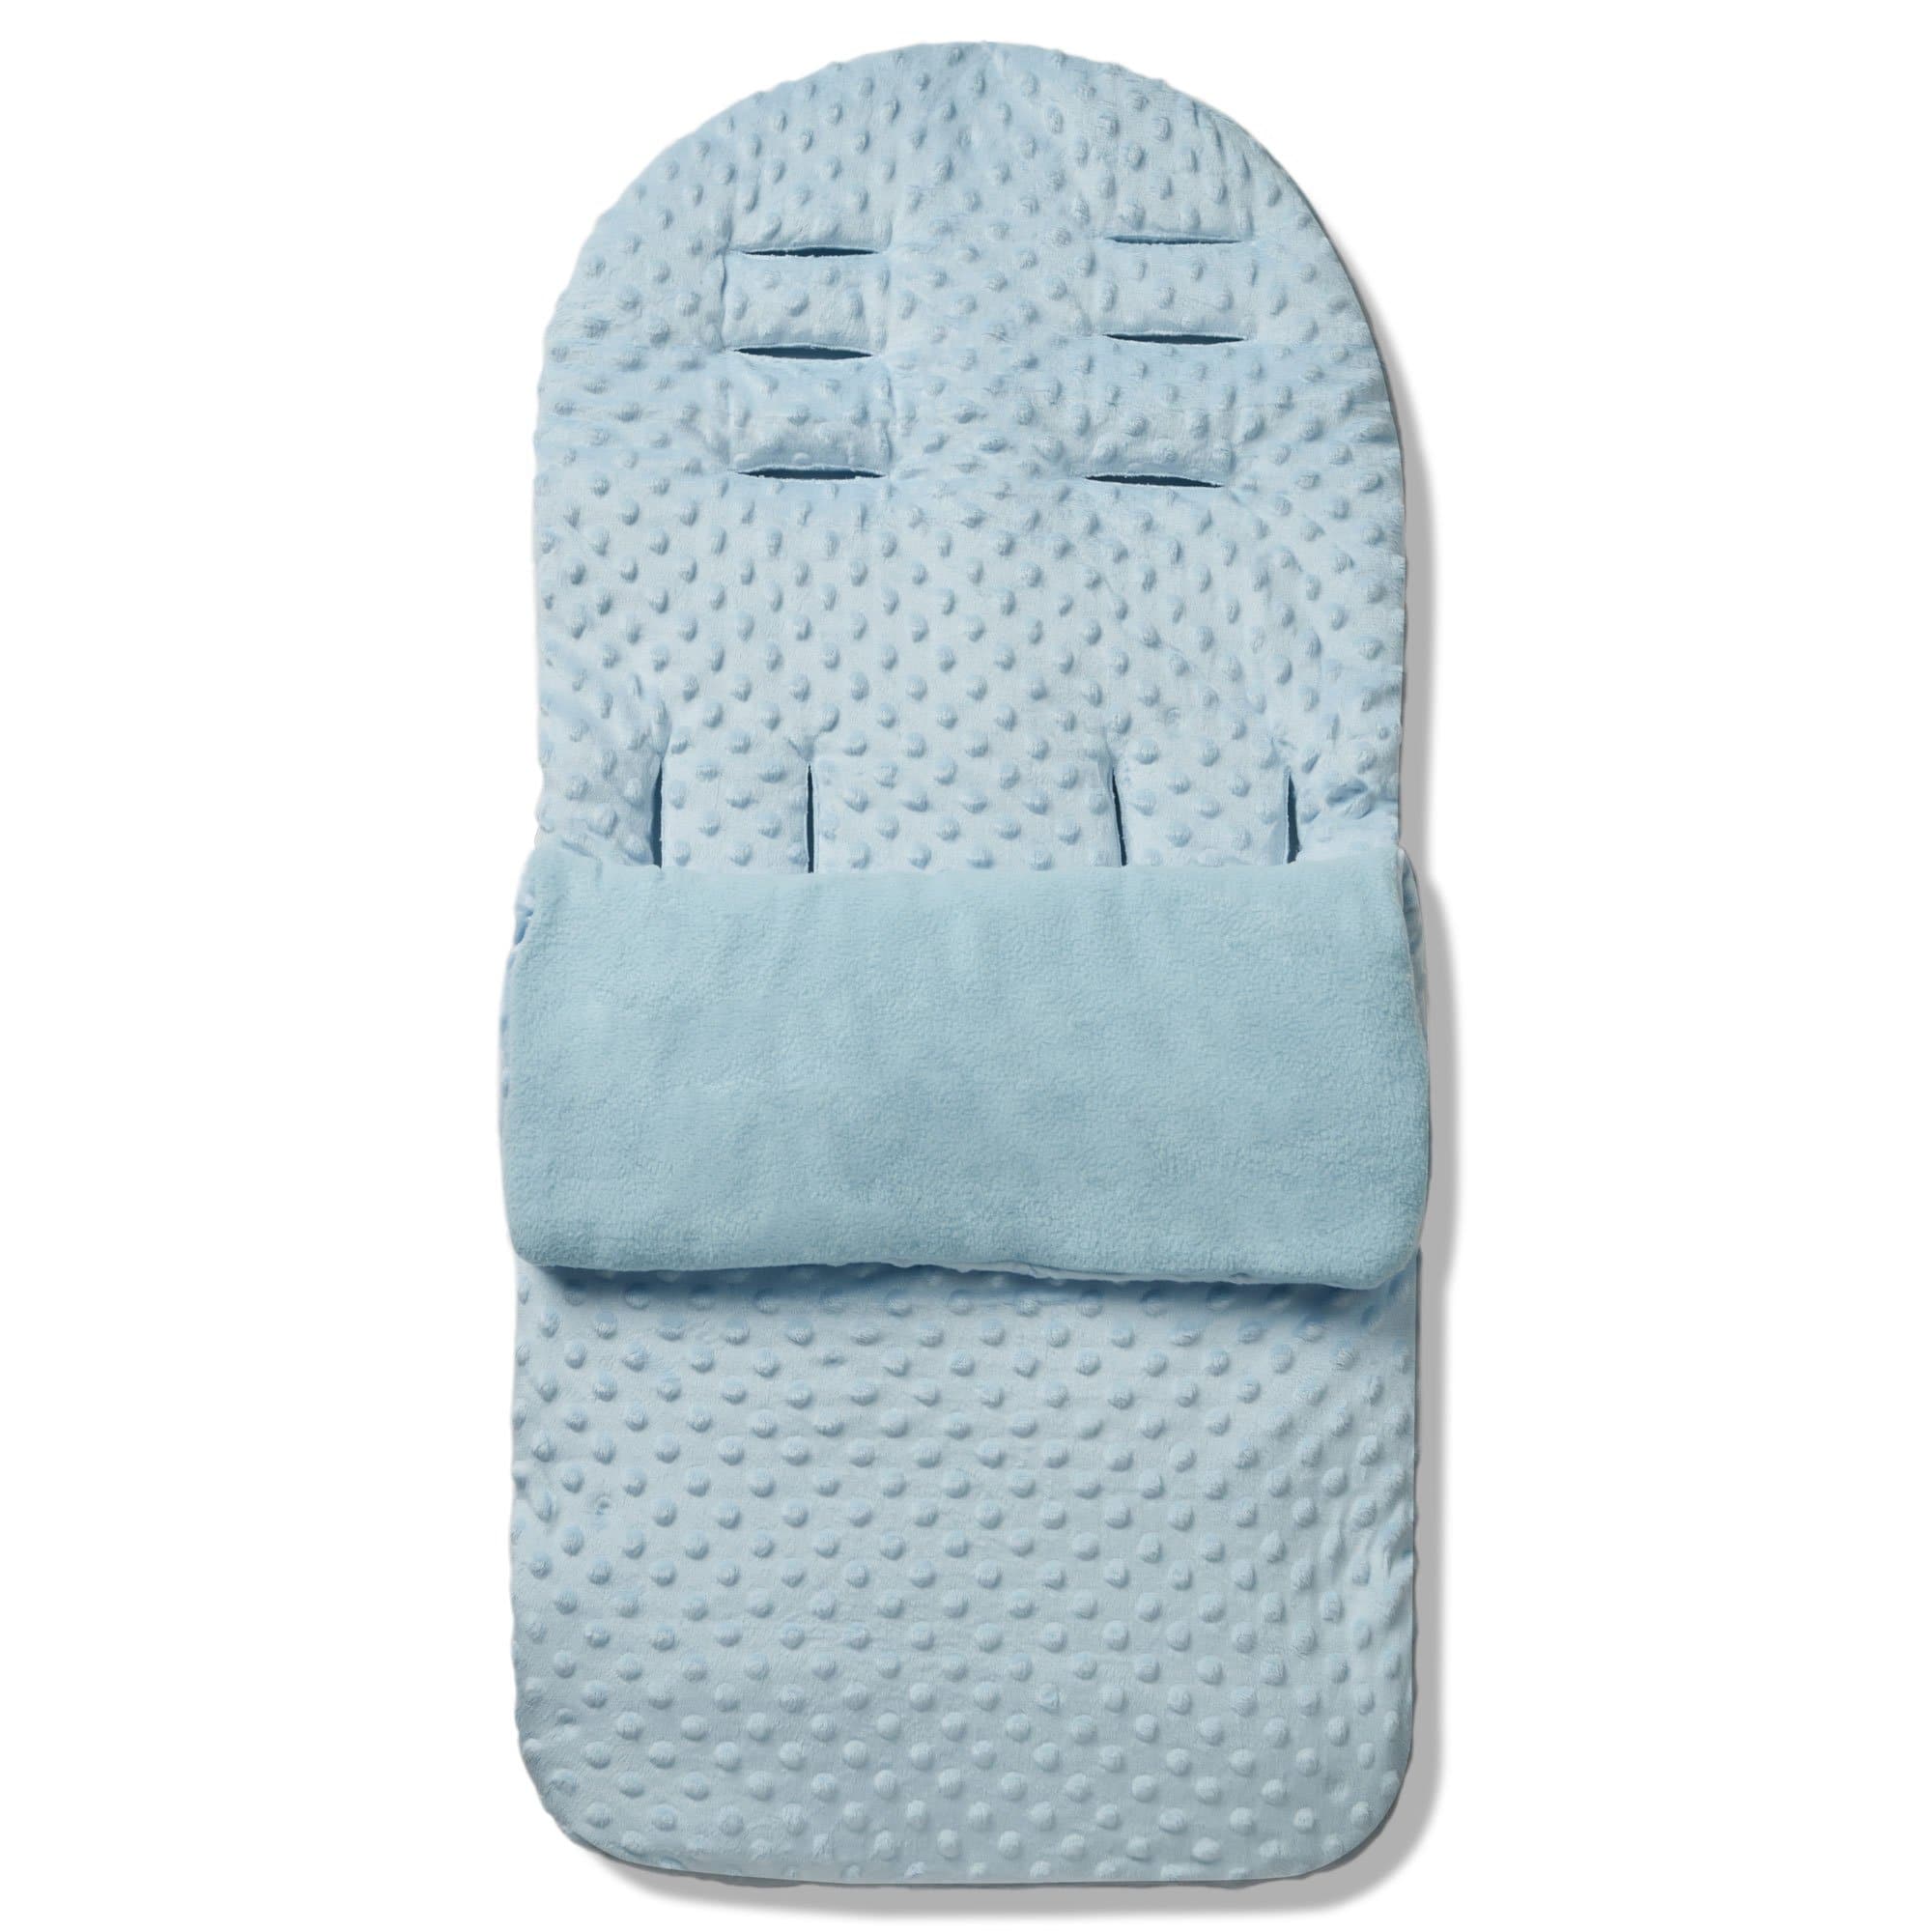 Dimple Footmuff / Cosy Toes Compatible with Kiddicouture - Blue / Fits All Models | For Your Little One